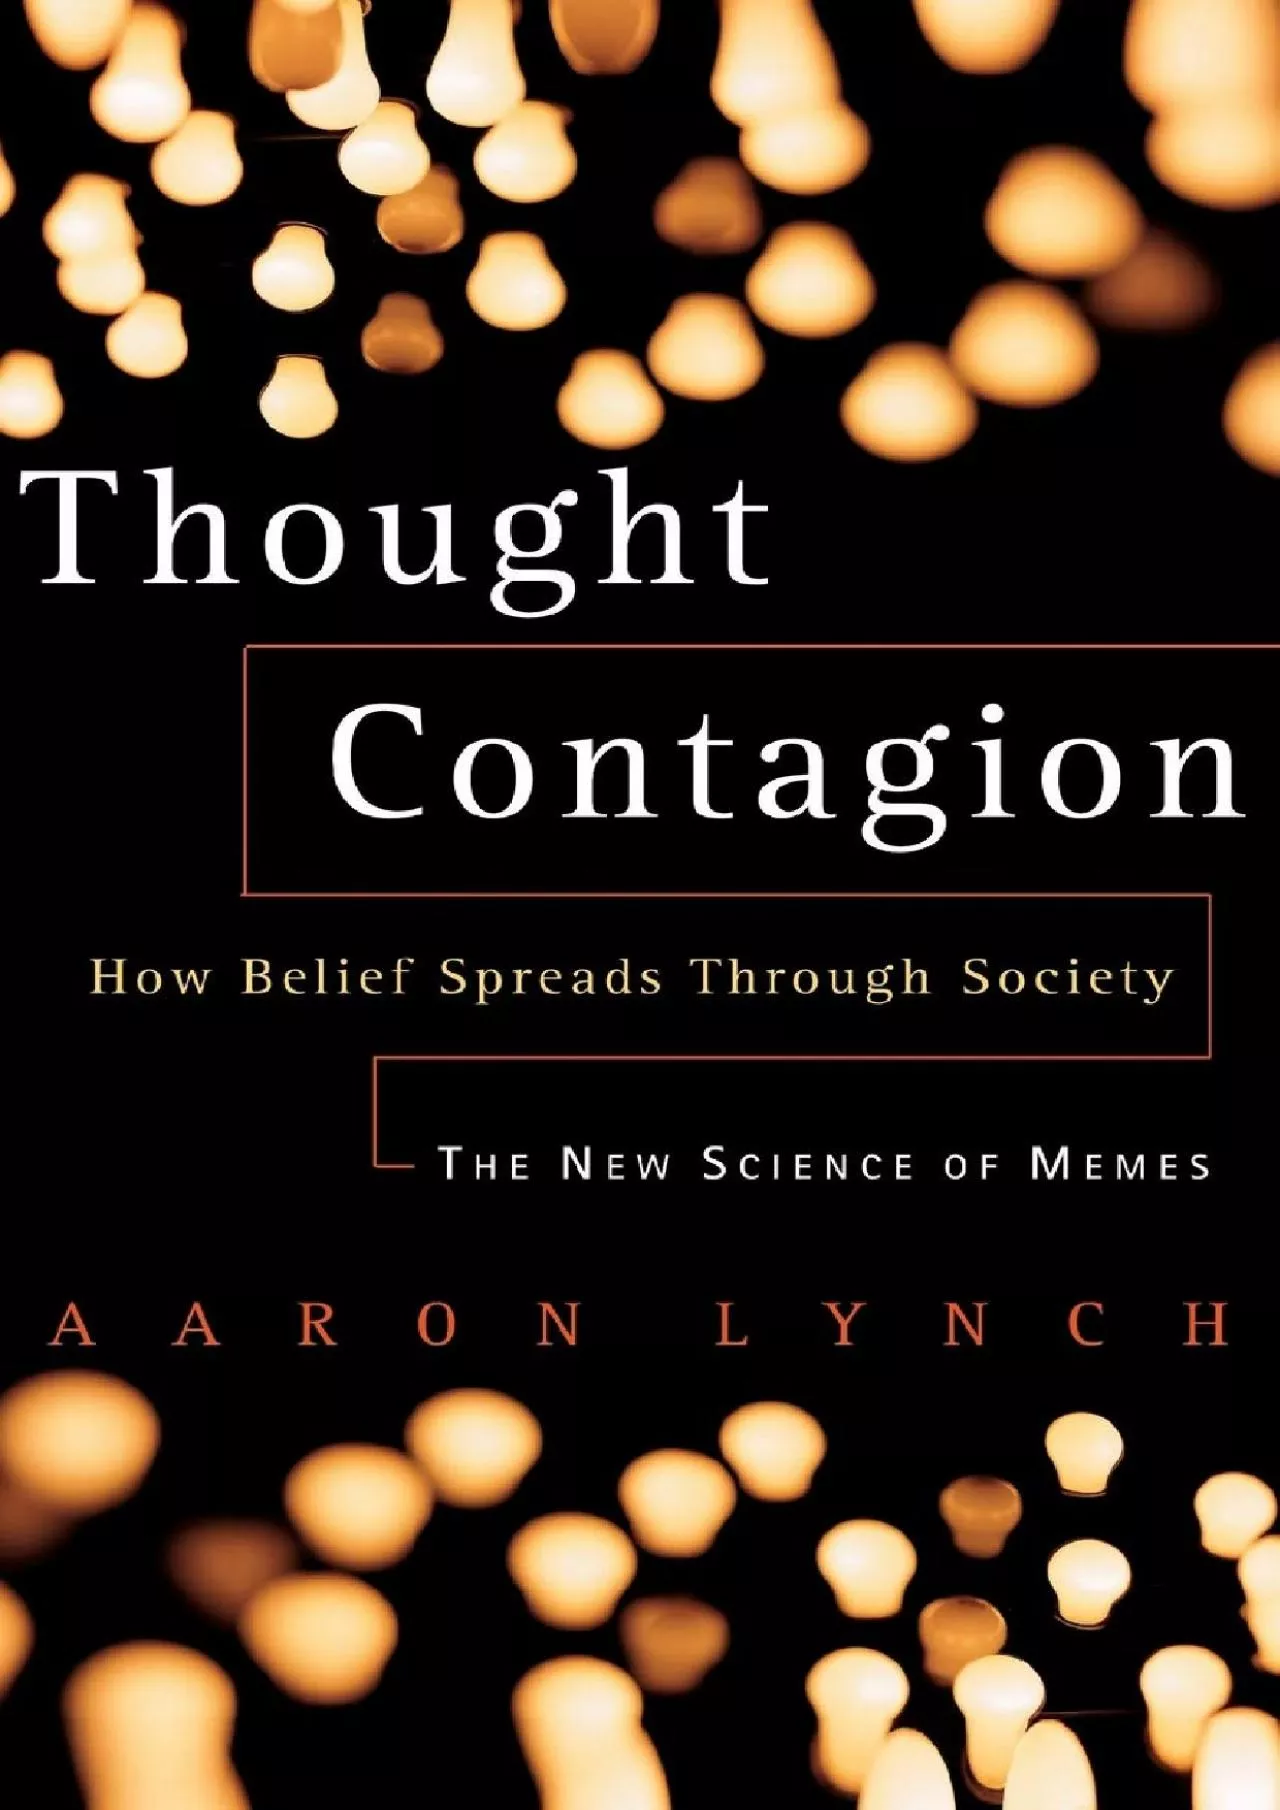 [EBOOK]-Thought Contagion